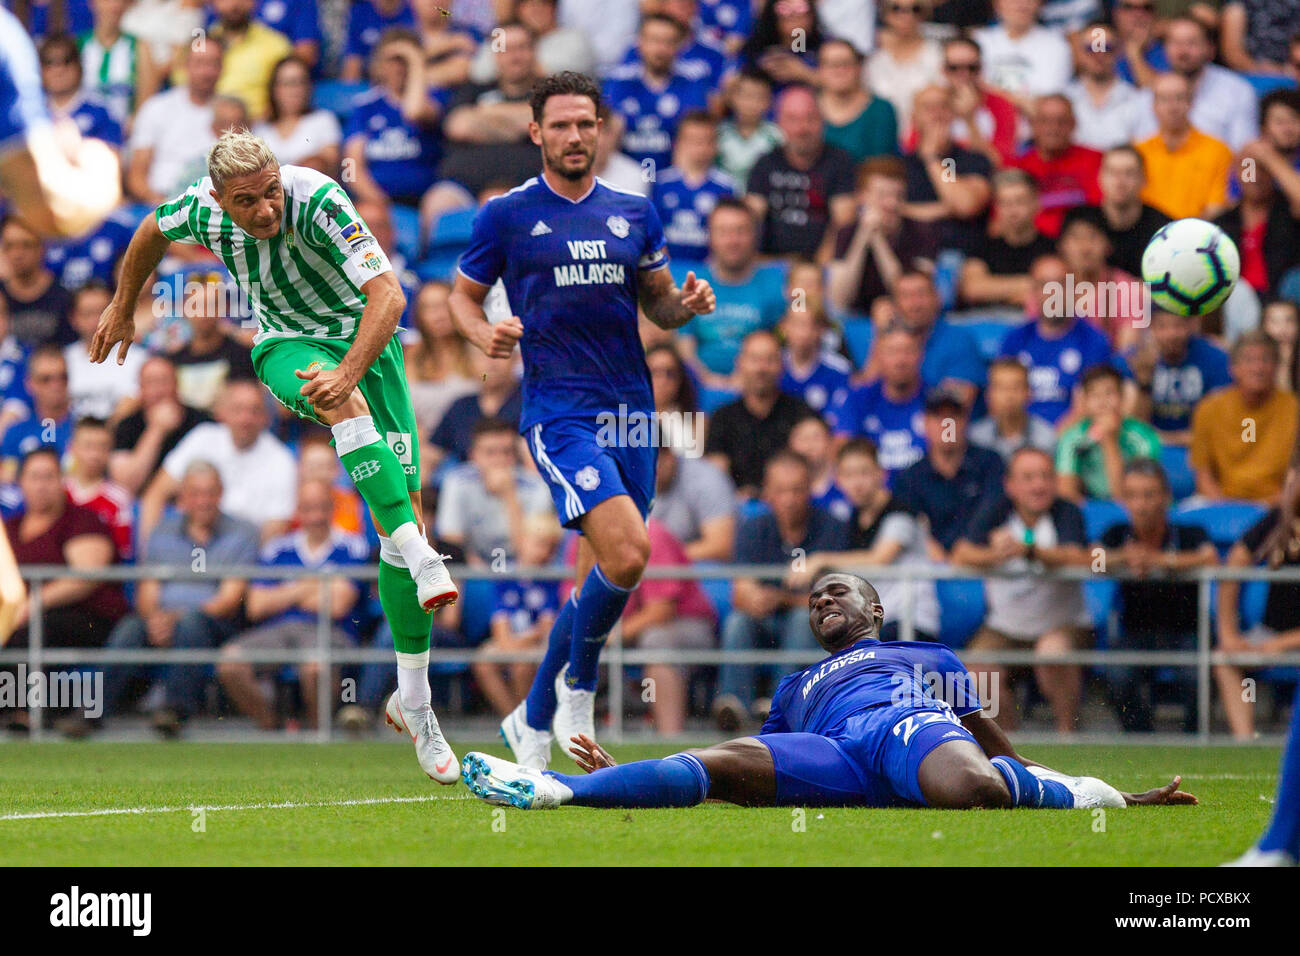 Cardiff, Wales, UK. 4th August 2018. Joaquin of Real Betis shoots under pressure from Sol Bamba of Cardiff City during the pre-season friendly match between Cardiff City of the Premier League and Real Betis of La Liga at Cardiff City Stadium. Credit: Mark Hawkins/Alamy Live News Stock Photo